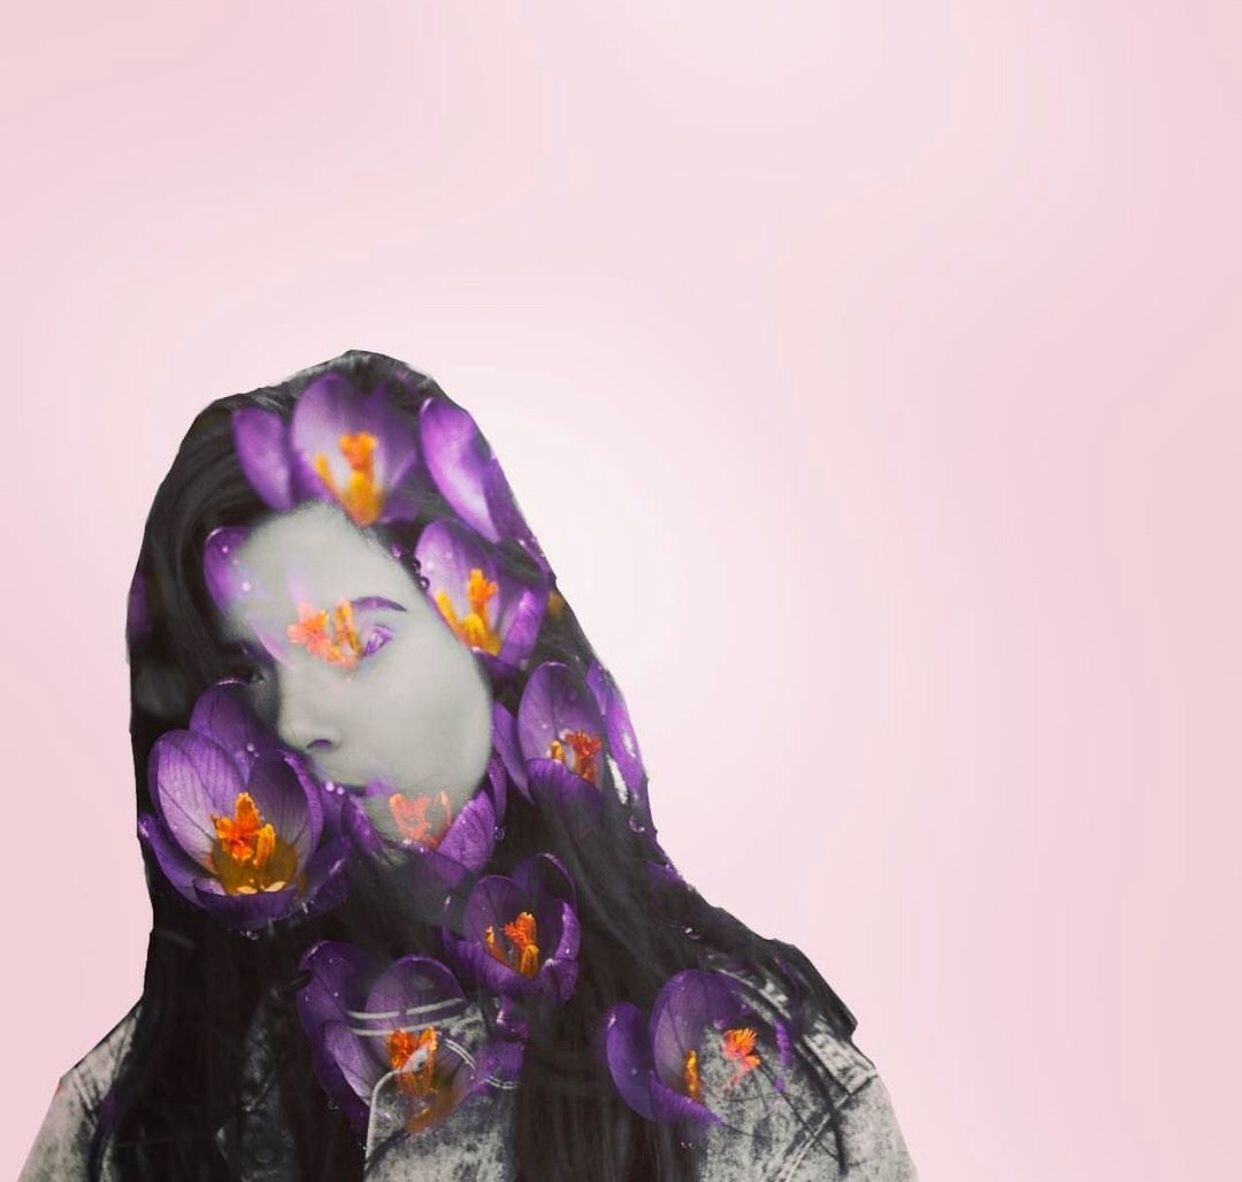 Double exposure of young woman and purple flowers against pink background